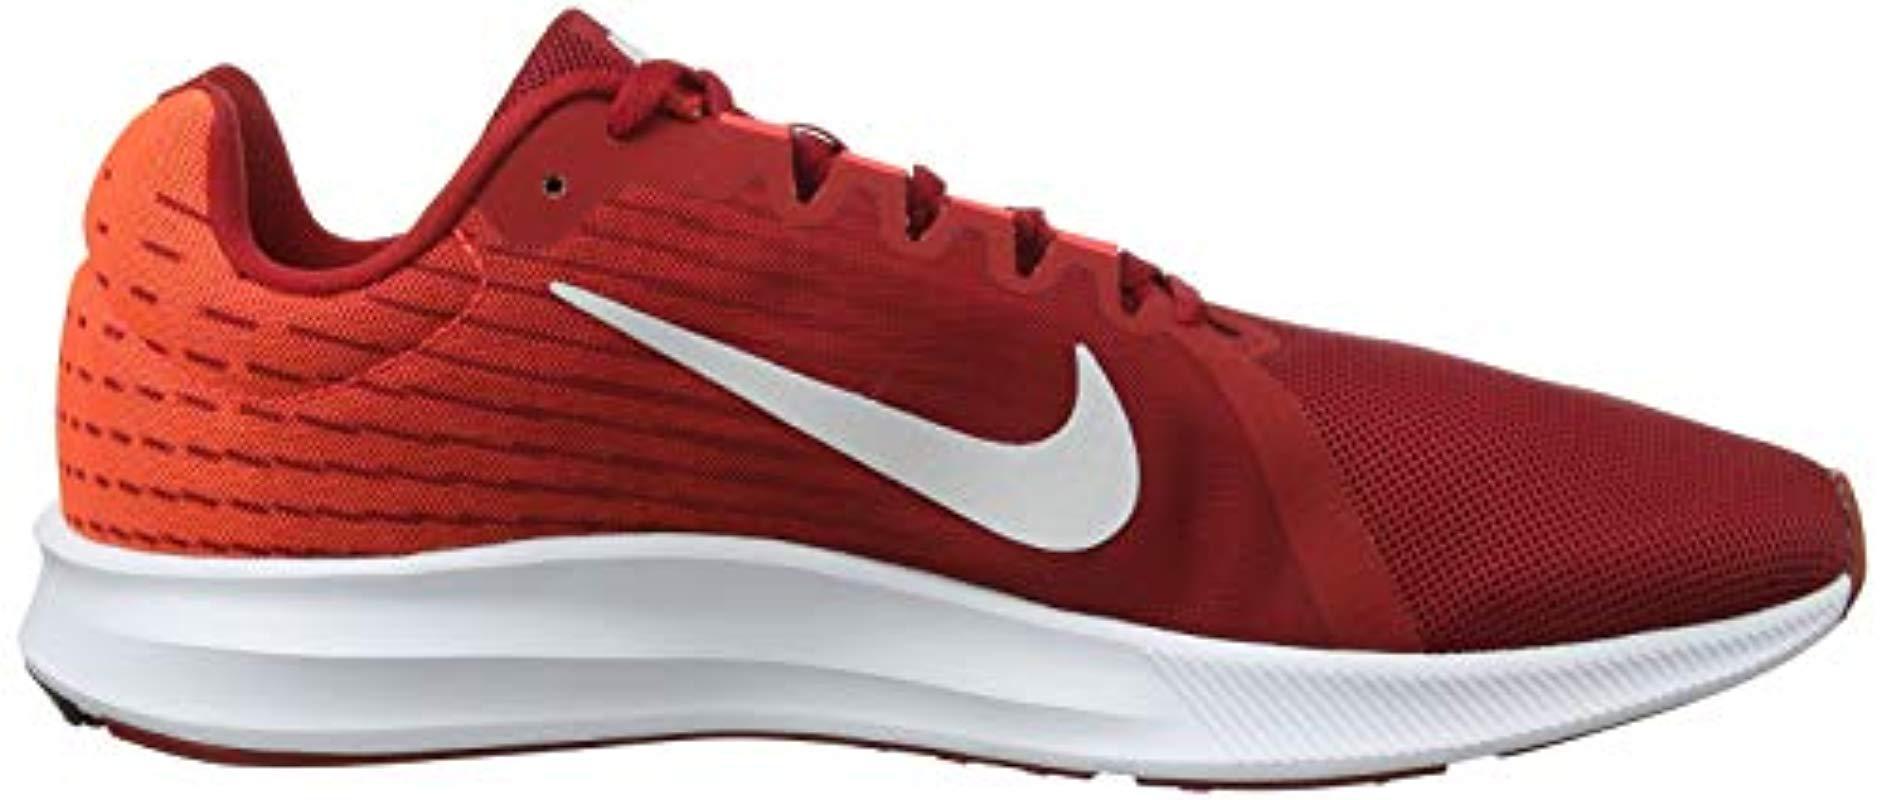 Nike Downshifter 8 Running Shoe in Black/White/Anthracite (Red) for Men -  Lyst